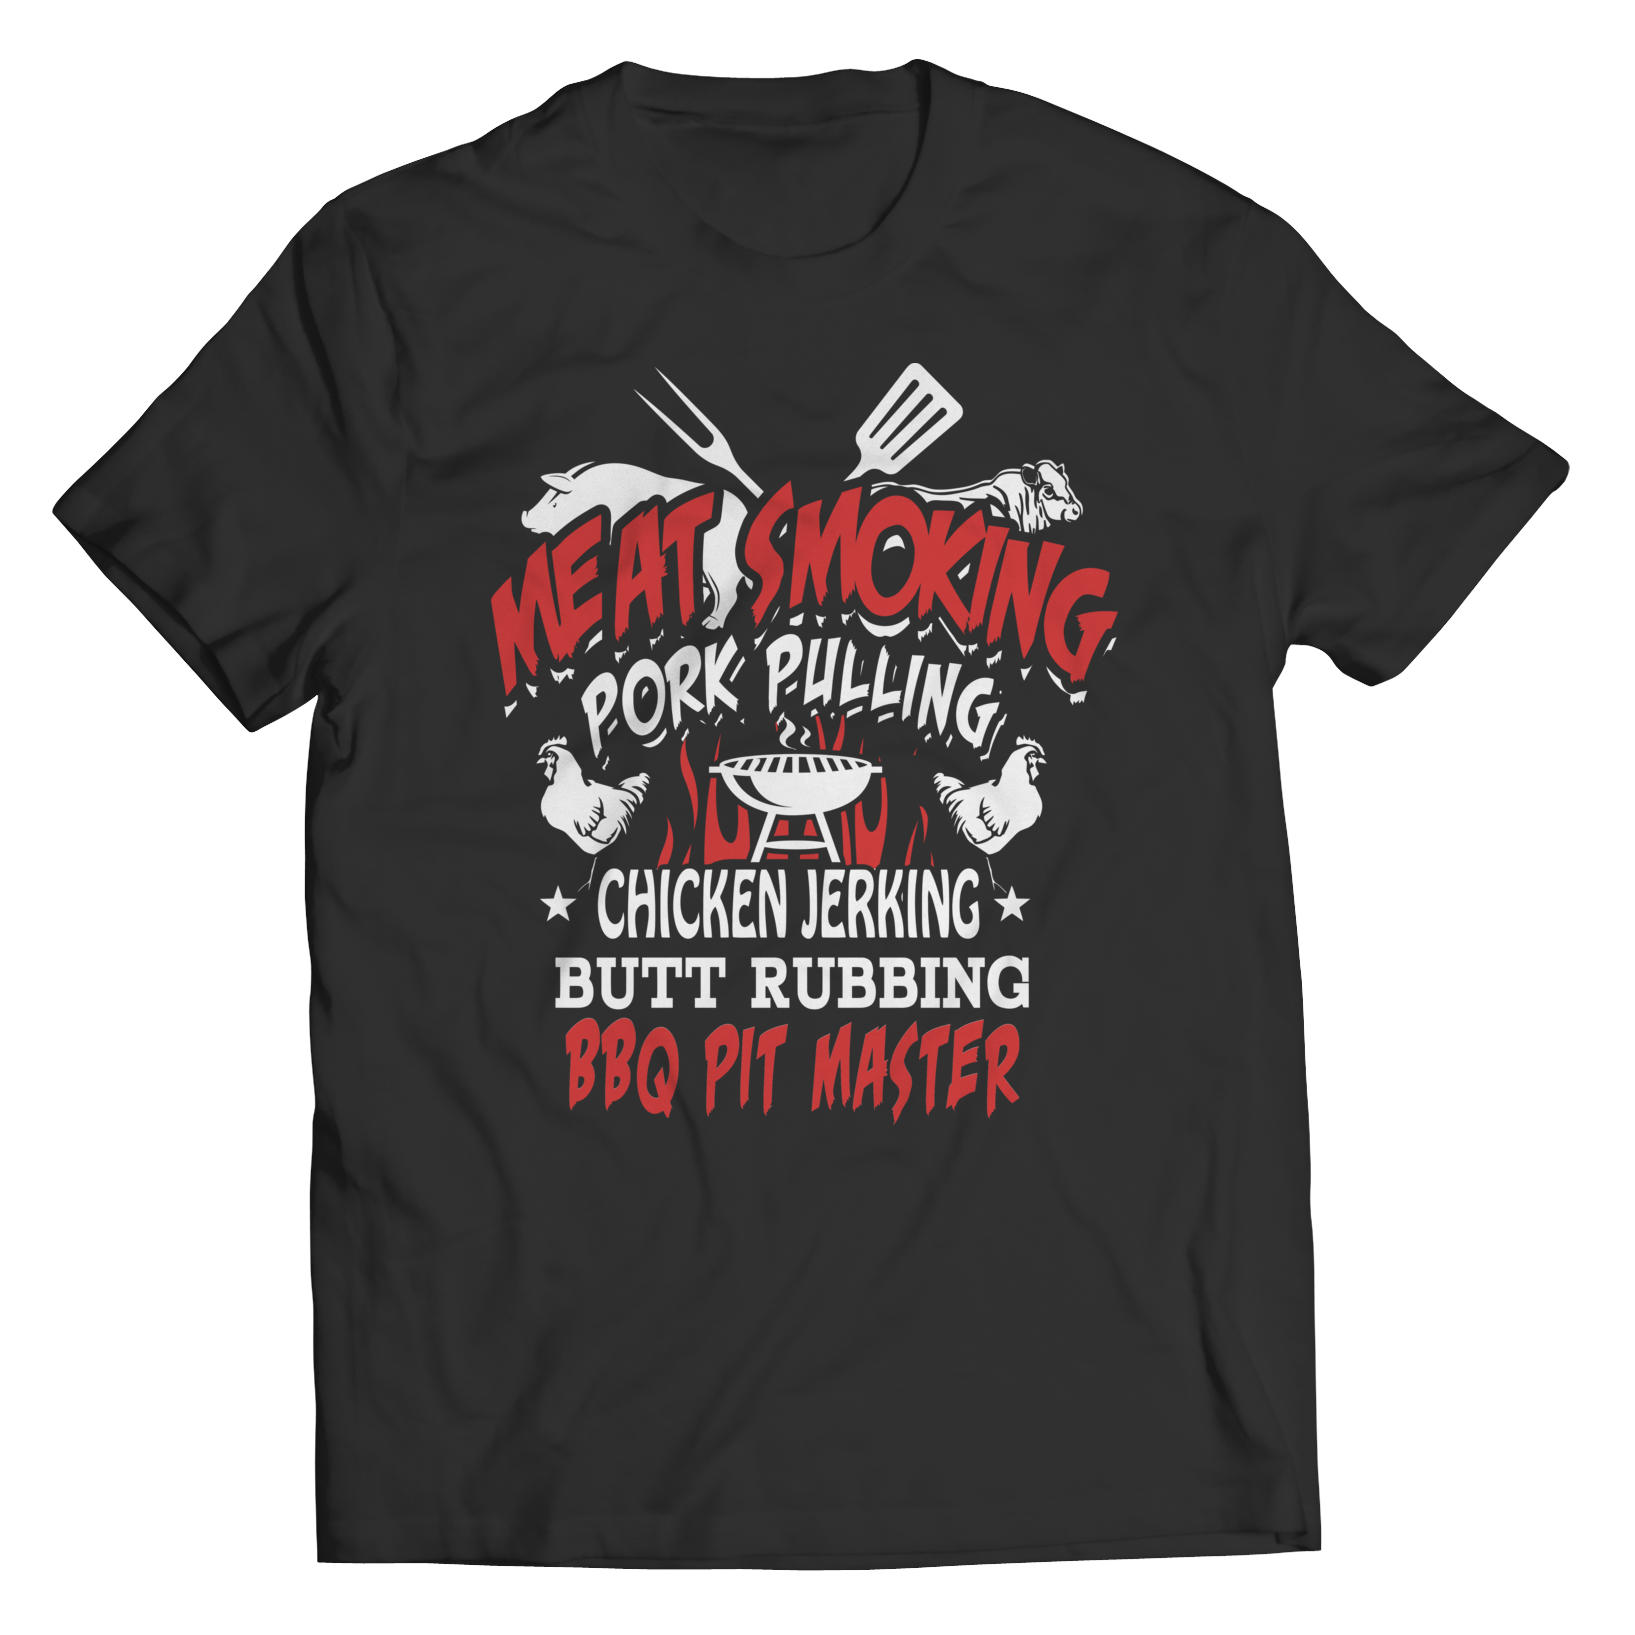 Limited Edition - Meat smoking pork pulling chicken jerking butt rubbing bbq pit master